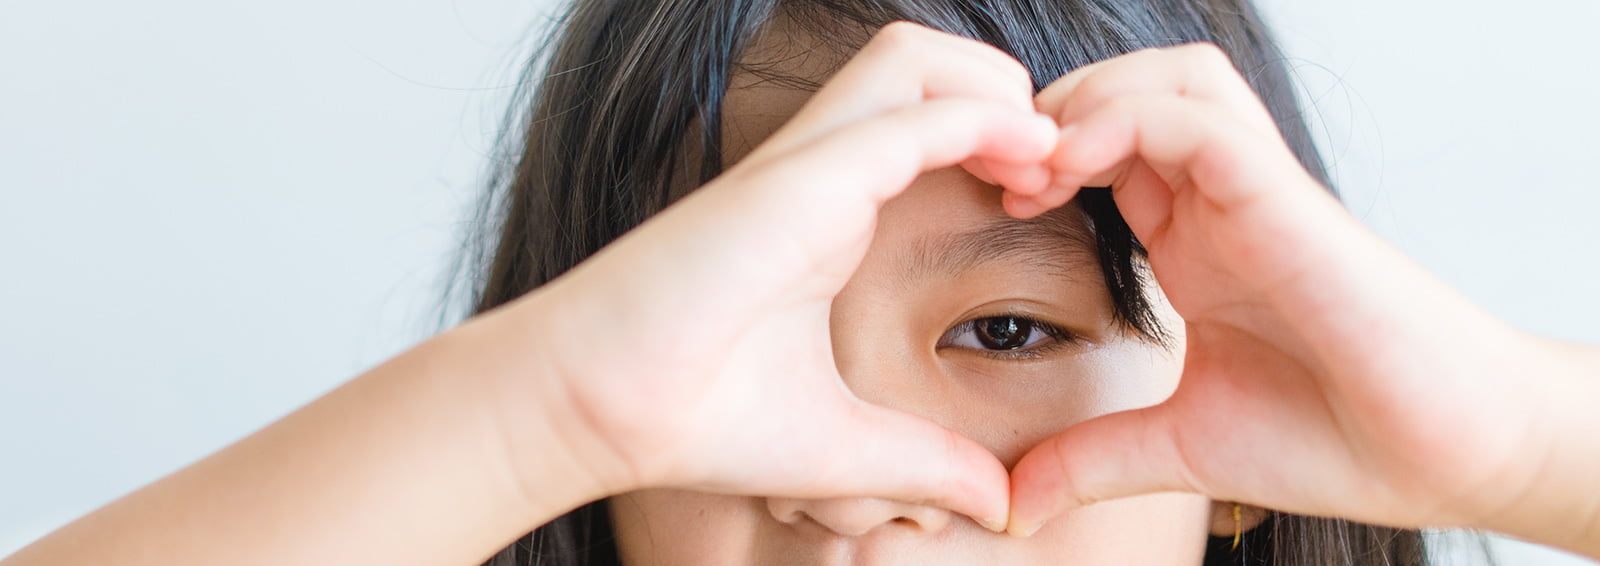 asian girl signing a heart over her eye